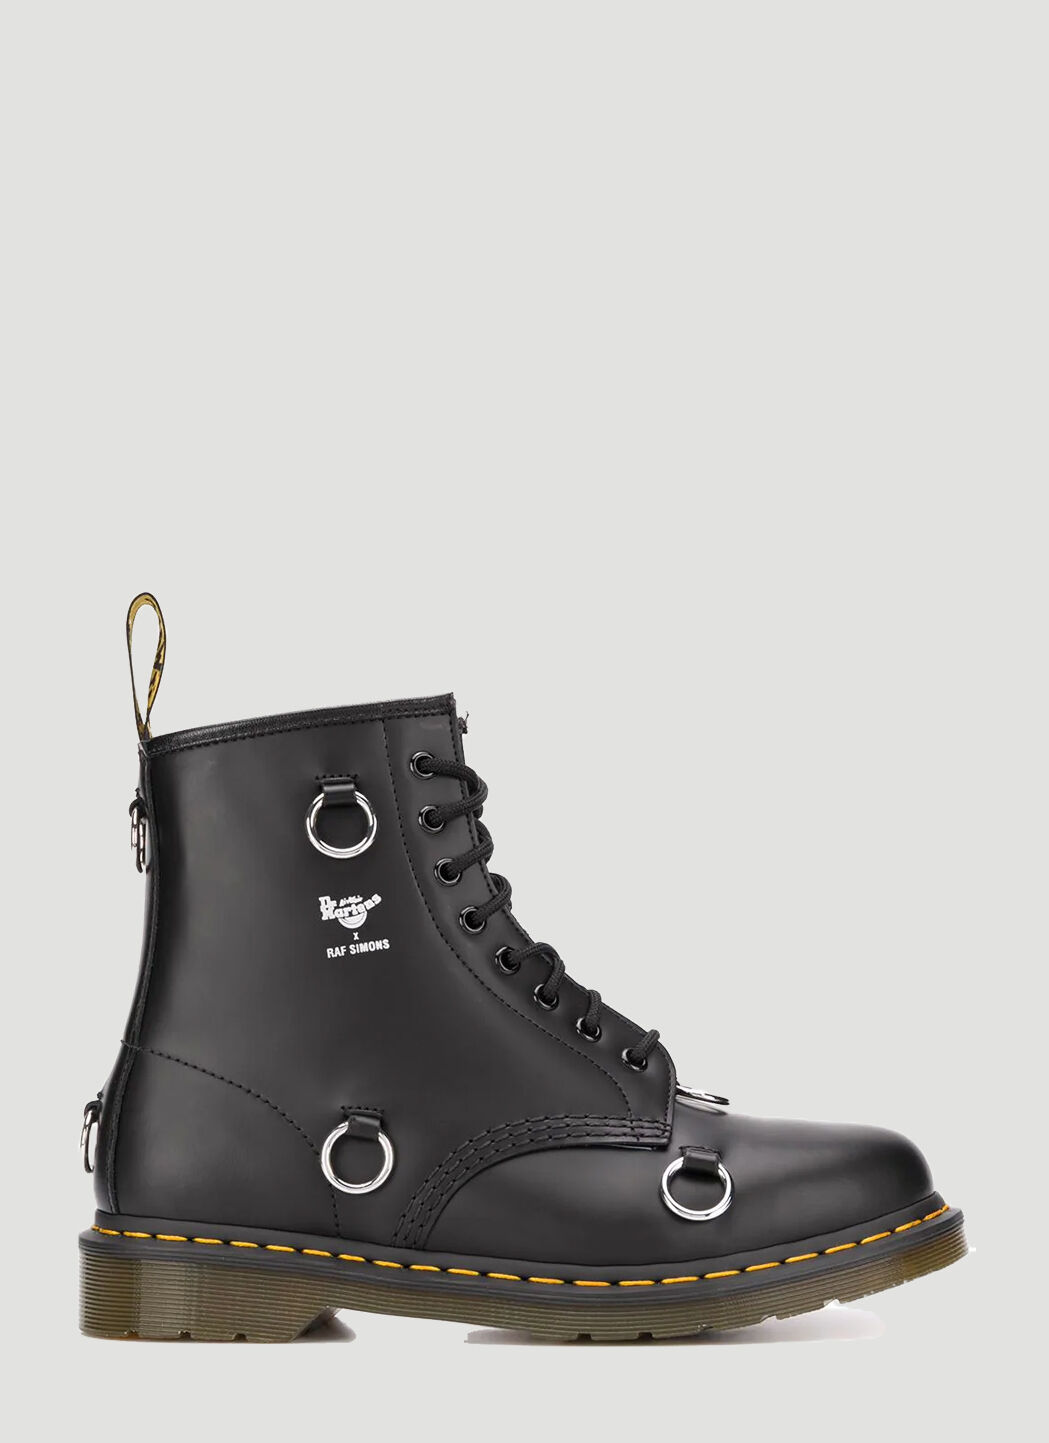 Raf Simons x Fred Perry X Dr. Martens Edition Ring-Embellished Boots 블랙 rsf0152002